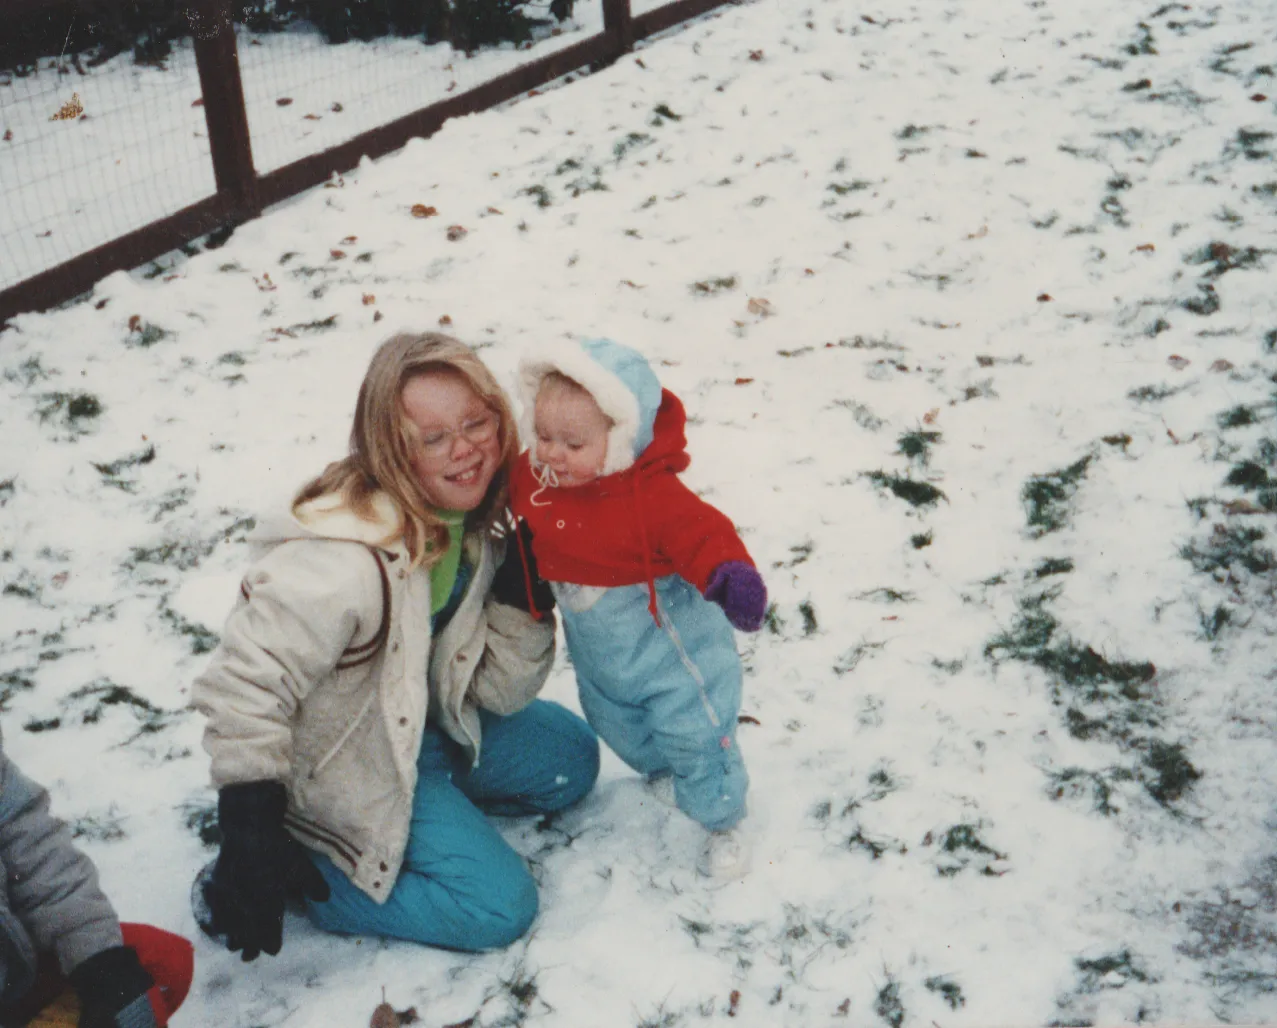 1990-12-25 - Crystal in Snow, Katie, Christmas, apx date-5.png